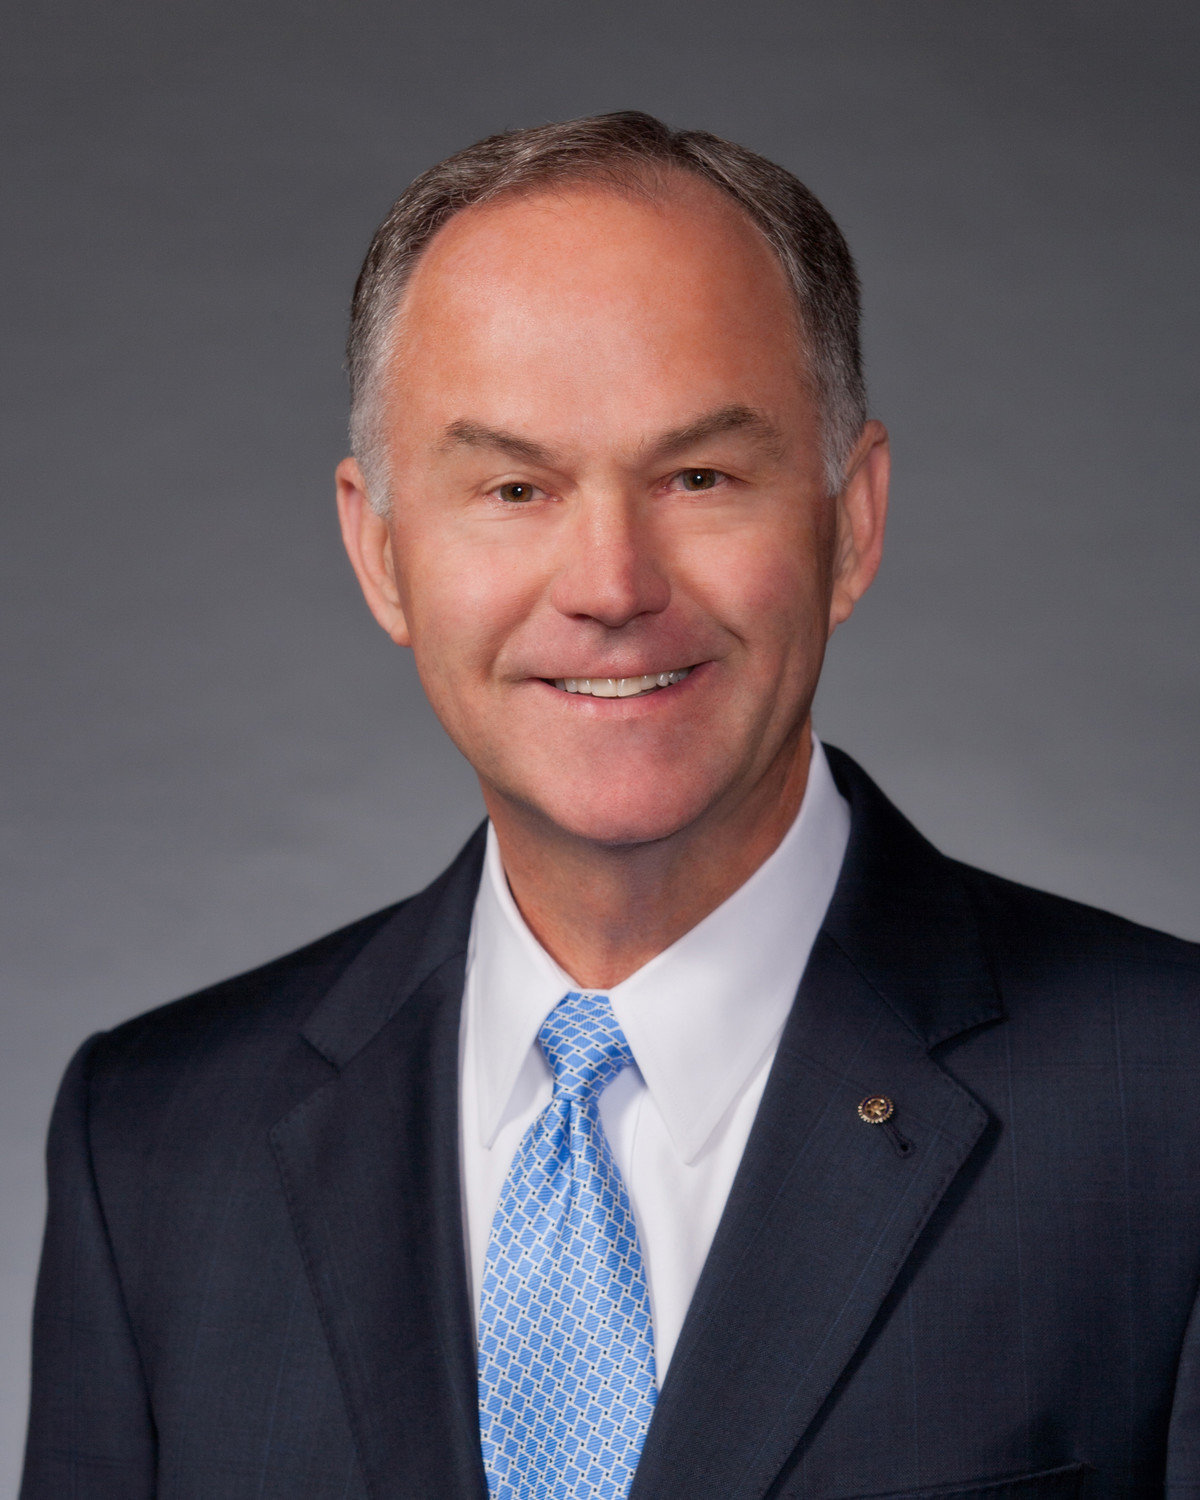 Bob Hammerschmidt becomes the regional chairperson for the wealth management division of Commerce Bank.